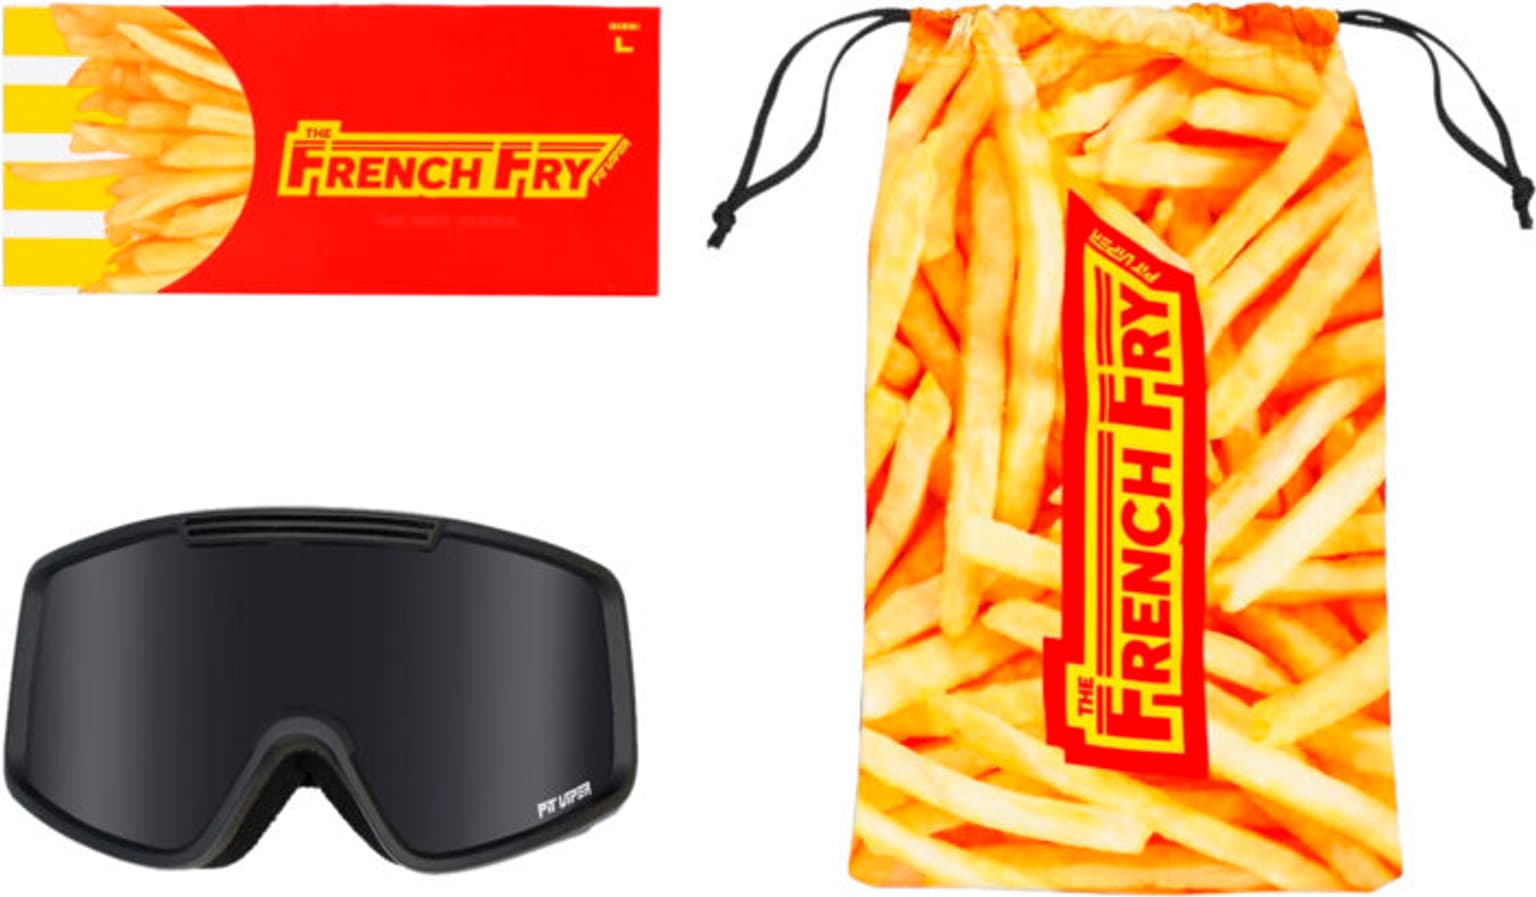 Pit Viper Pit Viper The French Fry Goggle Large The Standard Masque de ski 3